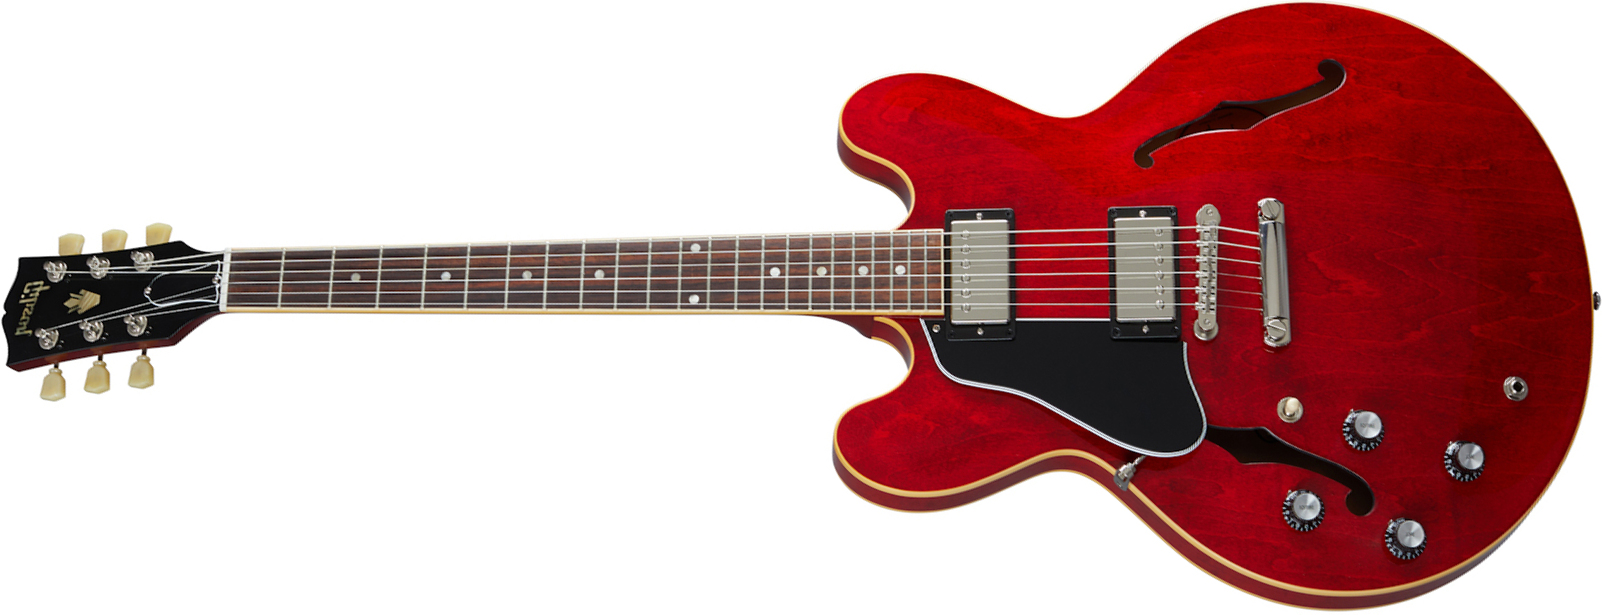 Gibson Es-335 Dot Lh Original 2020 Gaucher 2h Ht Rw - Sixties Cherry - Left-handed electric guitar - Main picture